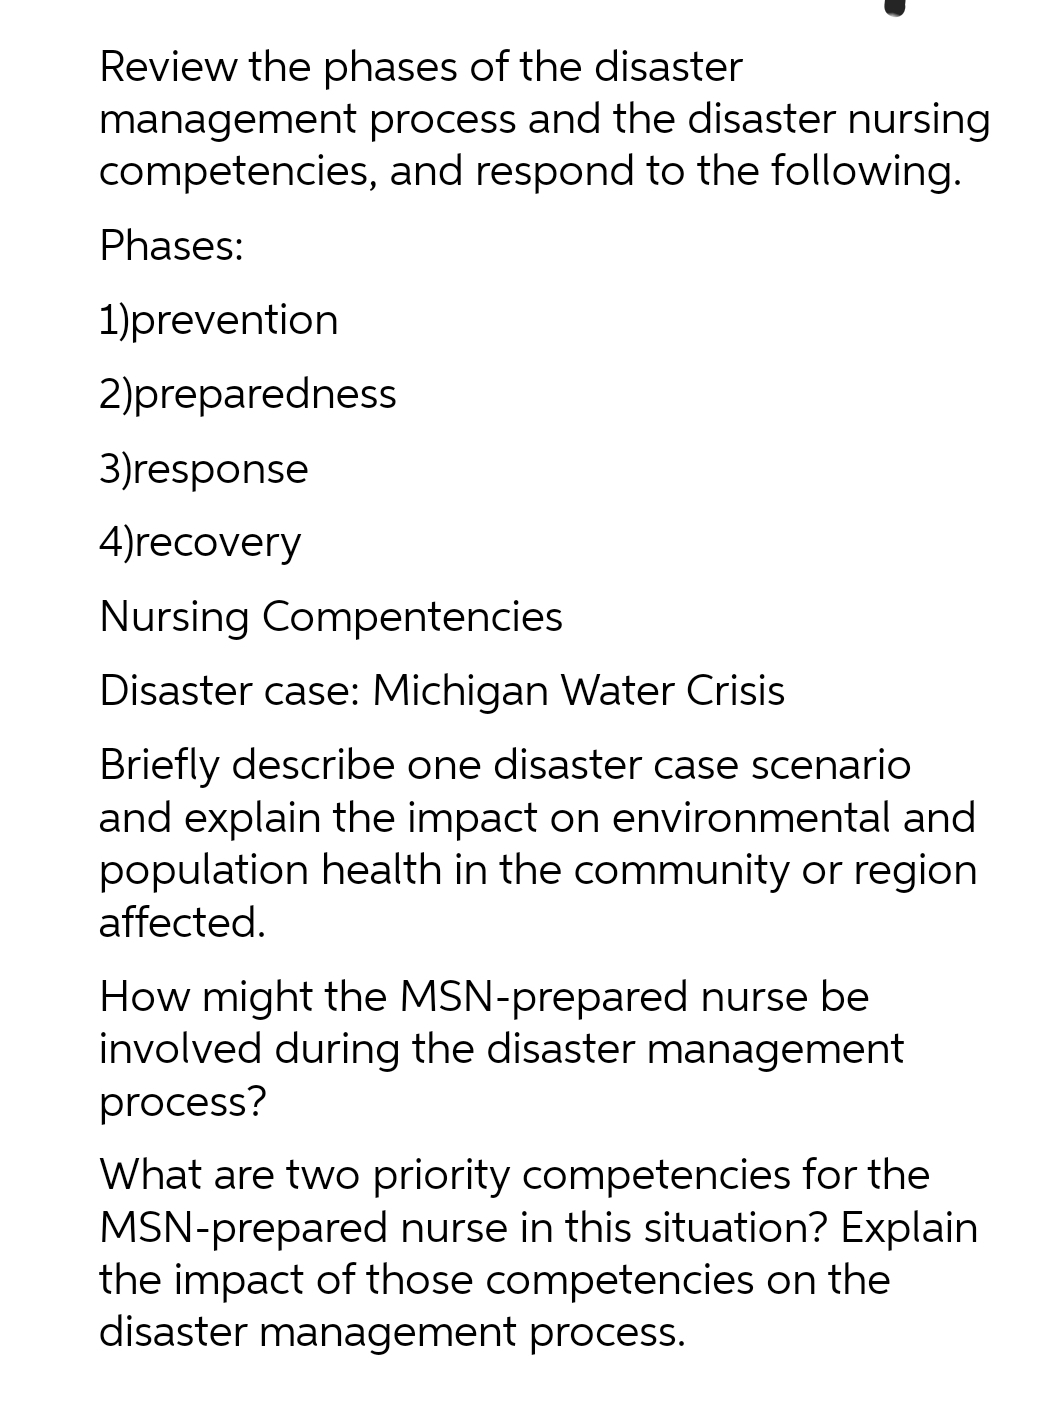 Review the phases of the disaster
management process and the disaster nursing
competencies, and respond to the following.
Phases:
1)prevention
2)preparedness
3)response
4)recovery
Nursing Compentencies
Disaster case: Michigan Water Crisis
Briefly describe one disaster case scenario
and explain the impact on environmental and
population health in the community or region
affected.
How might the MSN-prepared nurse be
involved during the disaster management
process?
What are two priority competencies for the
MSN-prepared nurse in this situation? Explain
the impact of those competencies on the
disaster management process.